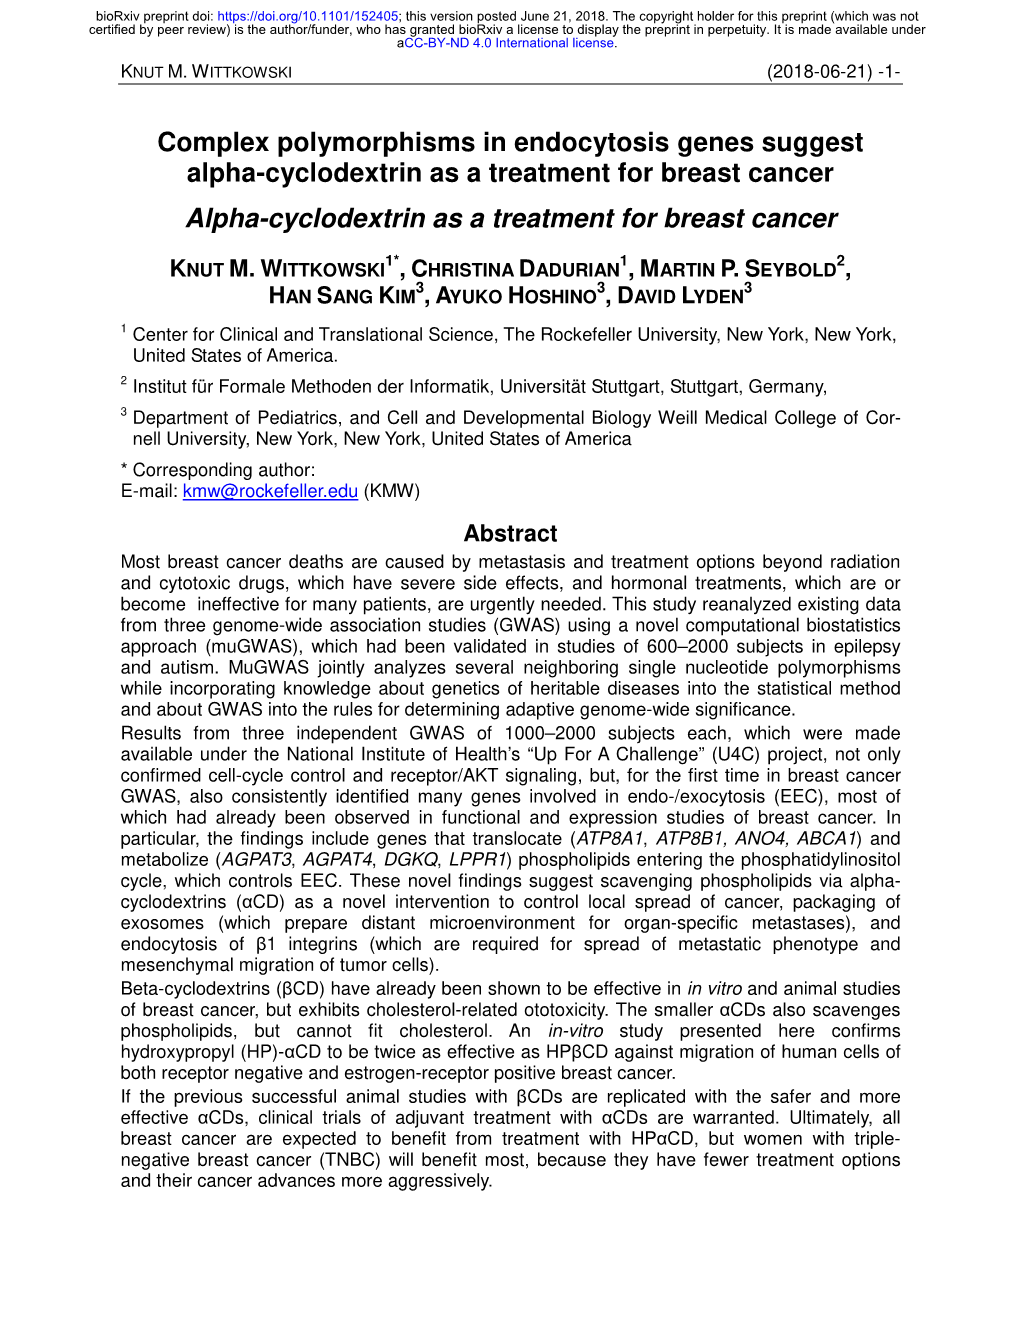 Complex Polymorphisms in Endocytosis Genes Suggest Alpha-Cyclodextrin As a Treatment for Breast Cancer Alpha-Cyclodextrin As a Treatment for Breast Cancer